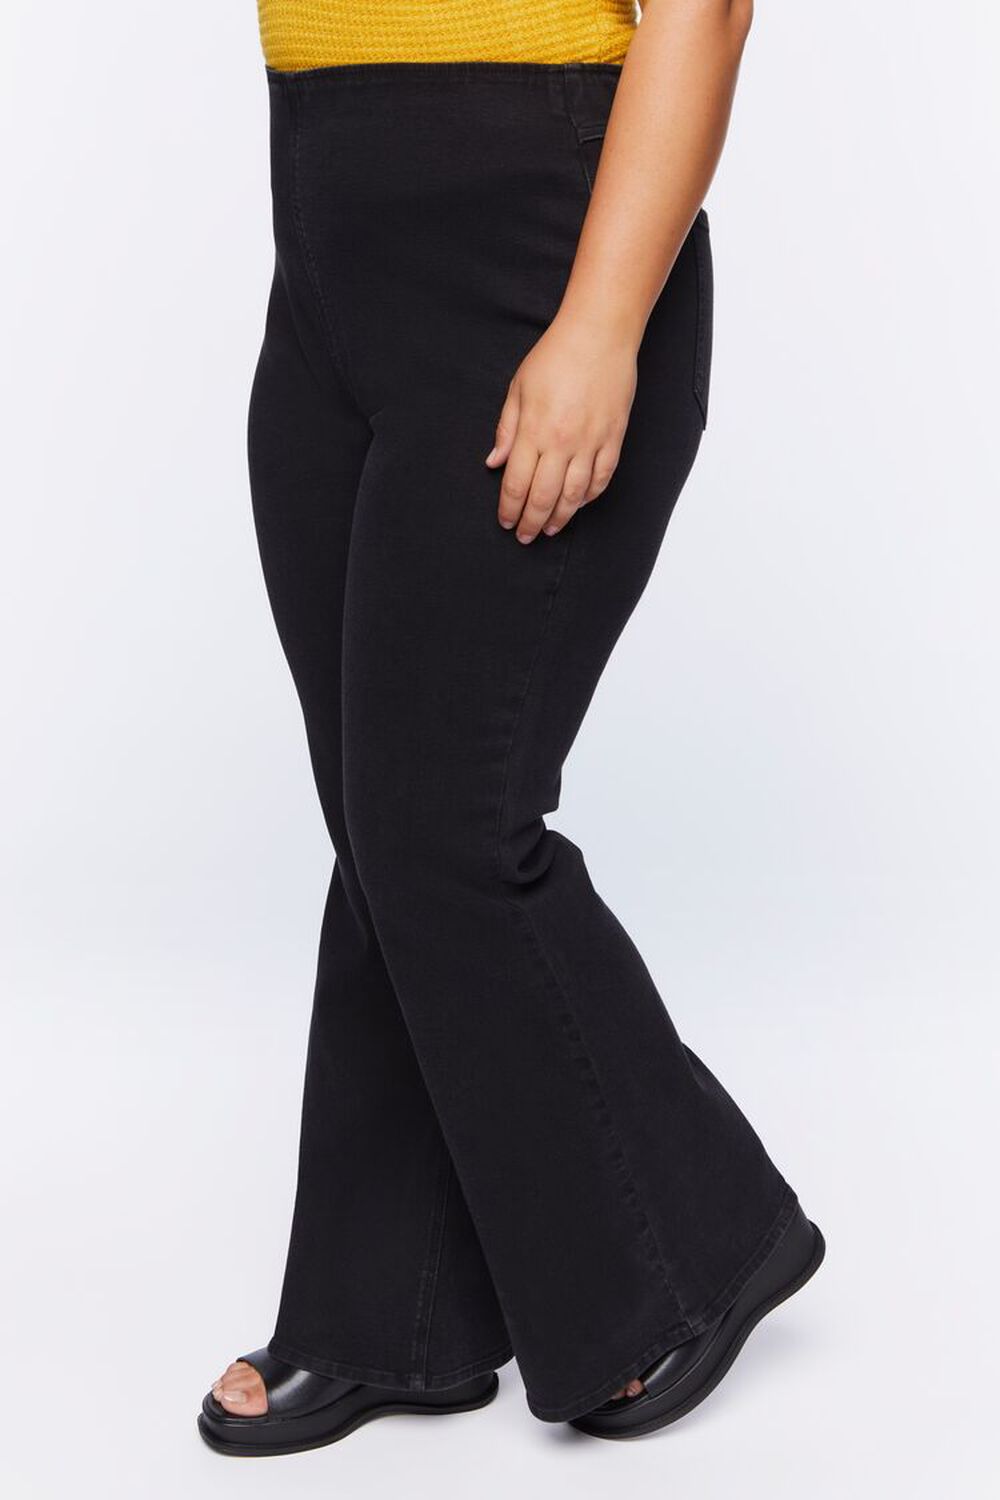 WASHED BLACK Plus Size High-Rise Flare Jeans, image 3